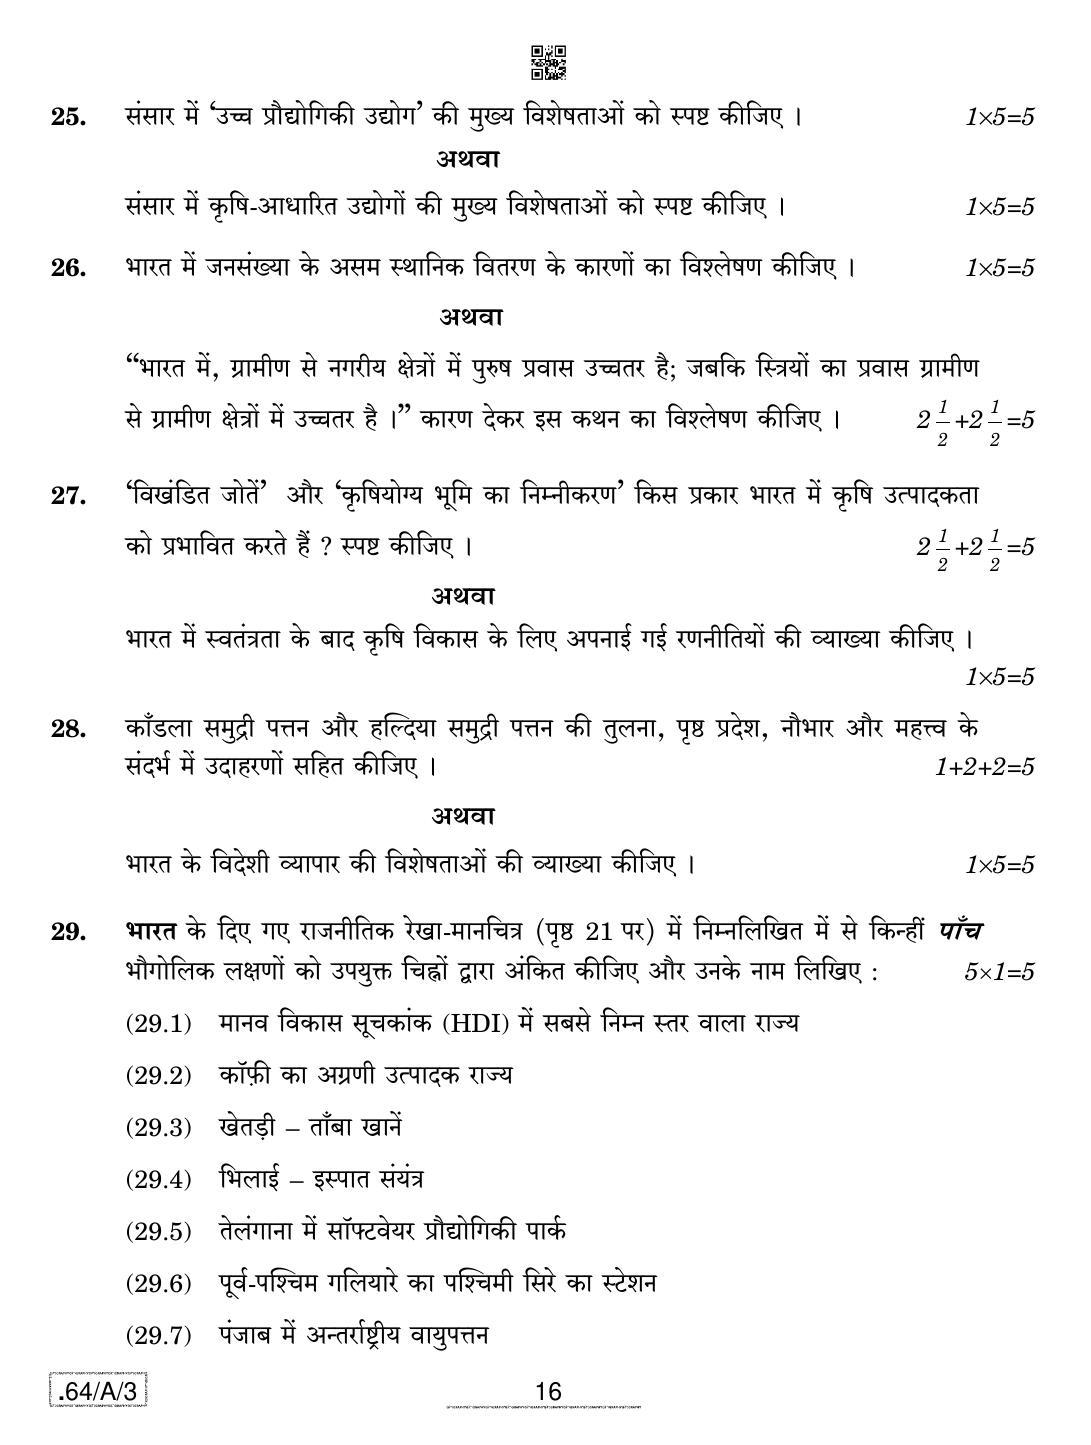 CBSE Class 12 64-C-3 - Geography 2020 Compartment Question Paper - Page 16